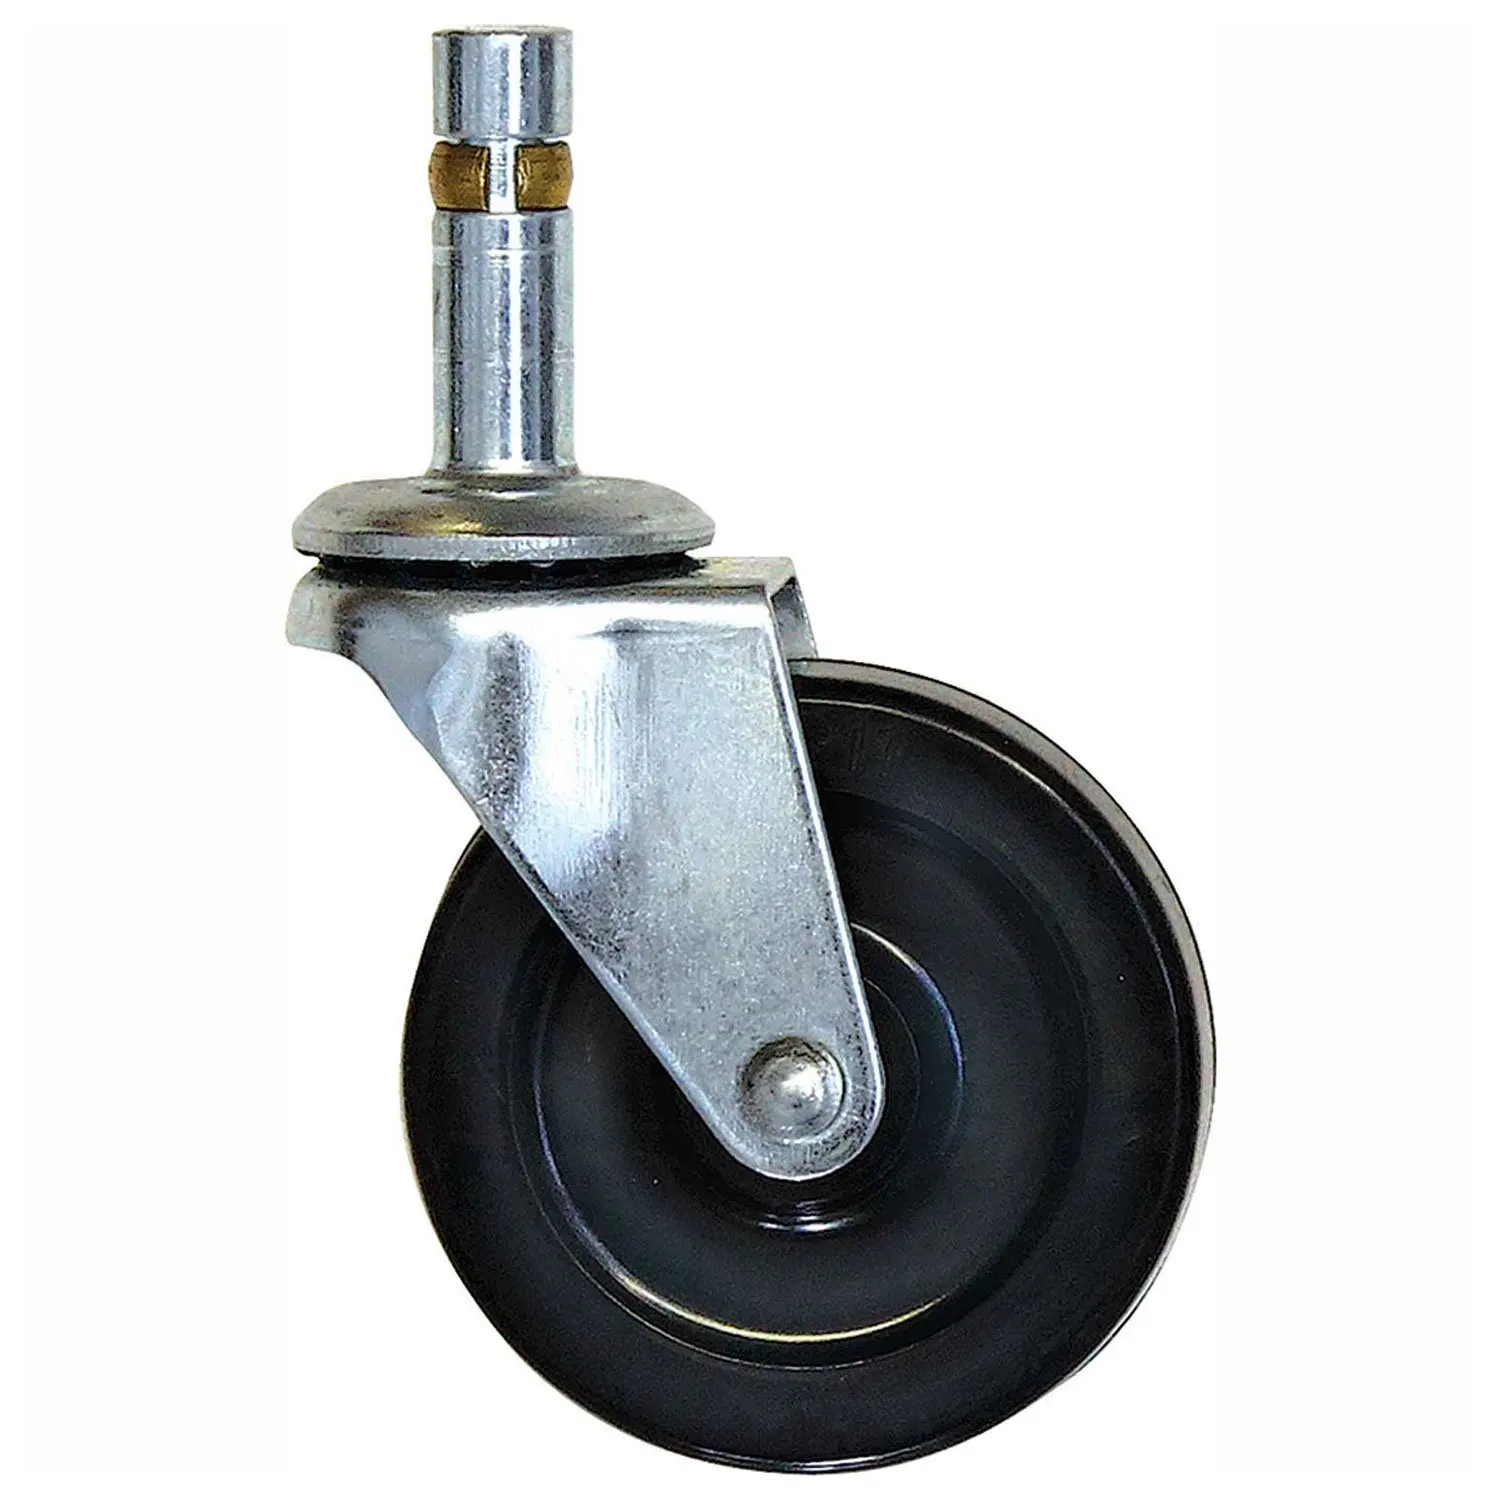 Cheap Dolly Caster Wheels find Dolly Caster Wheels deals on line at